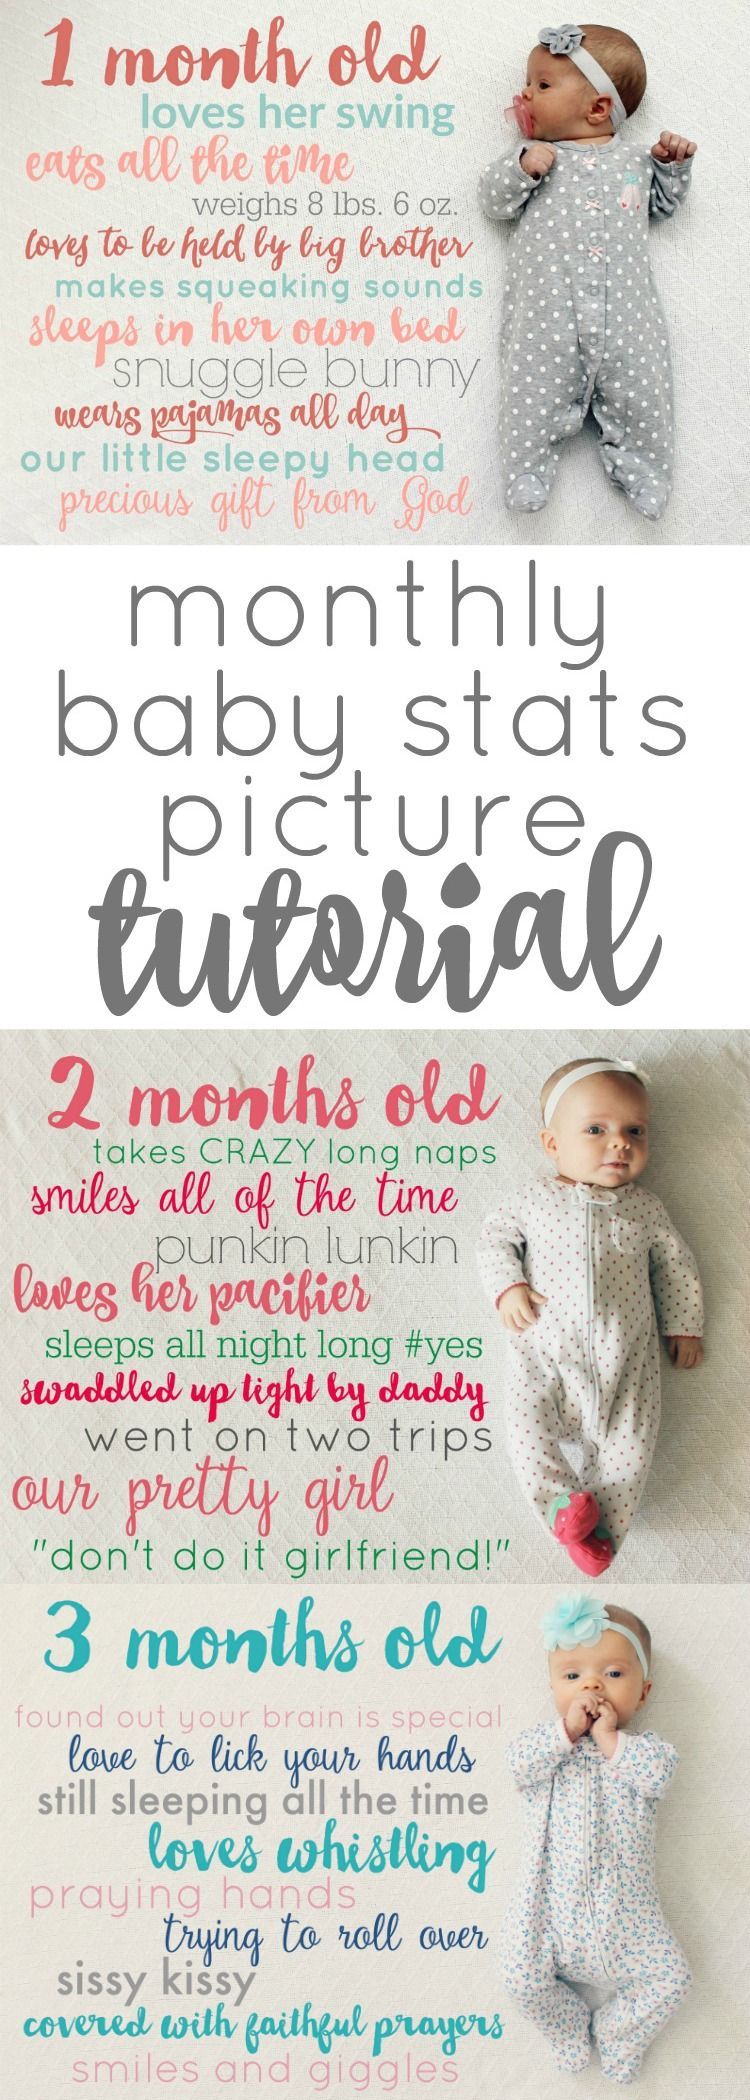 Monthly Baby Stats Picture Tutorial: Child at Heart Blog